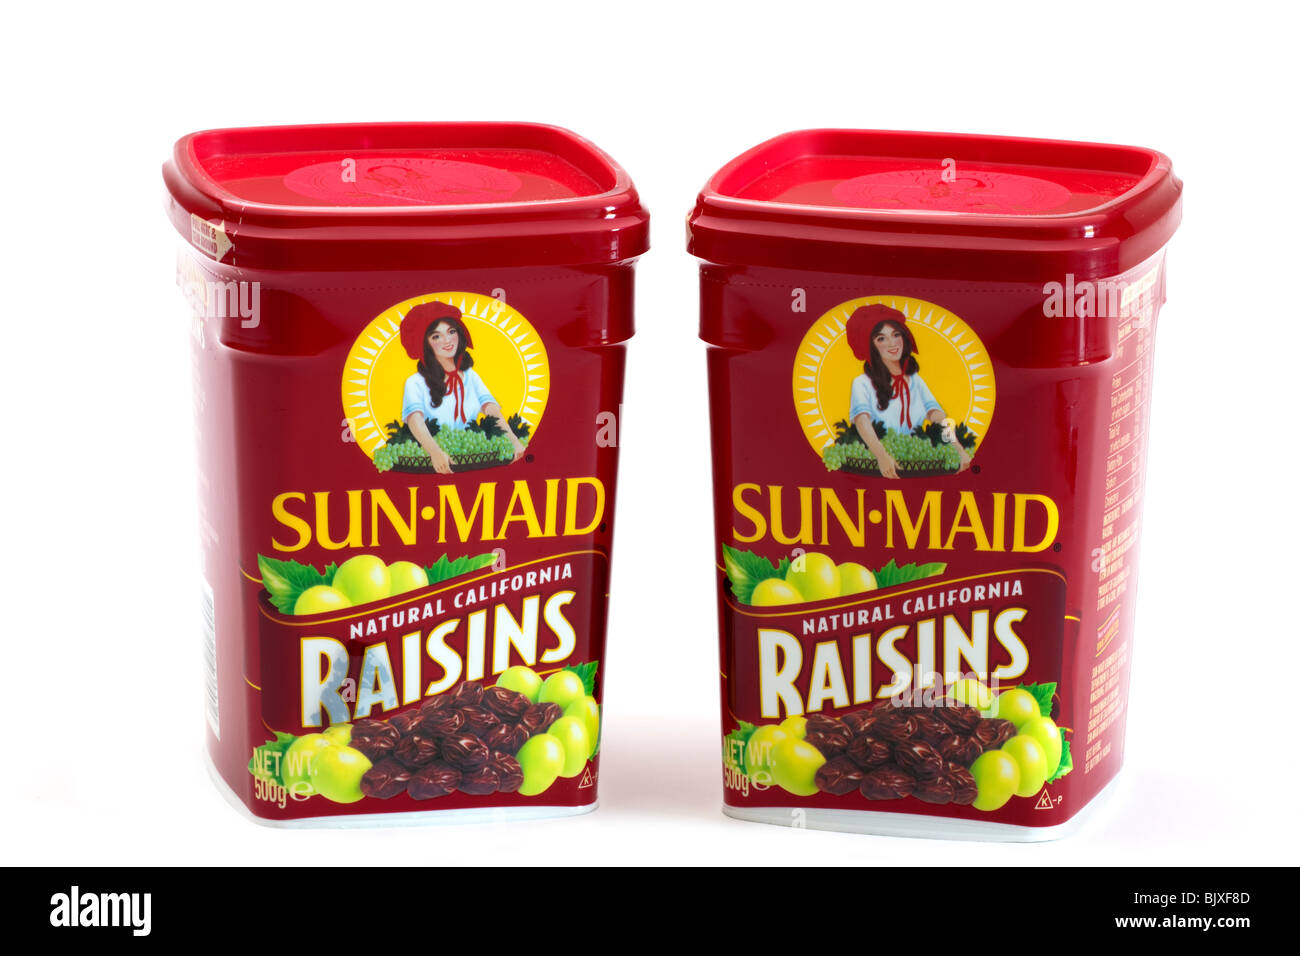 Sunmaid Cut Out Stock Images & Pictures - Alamy